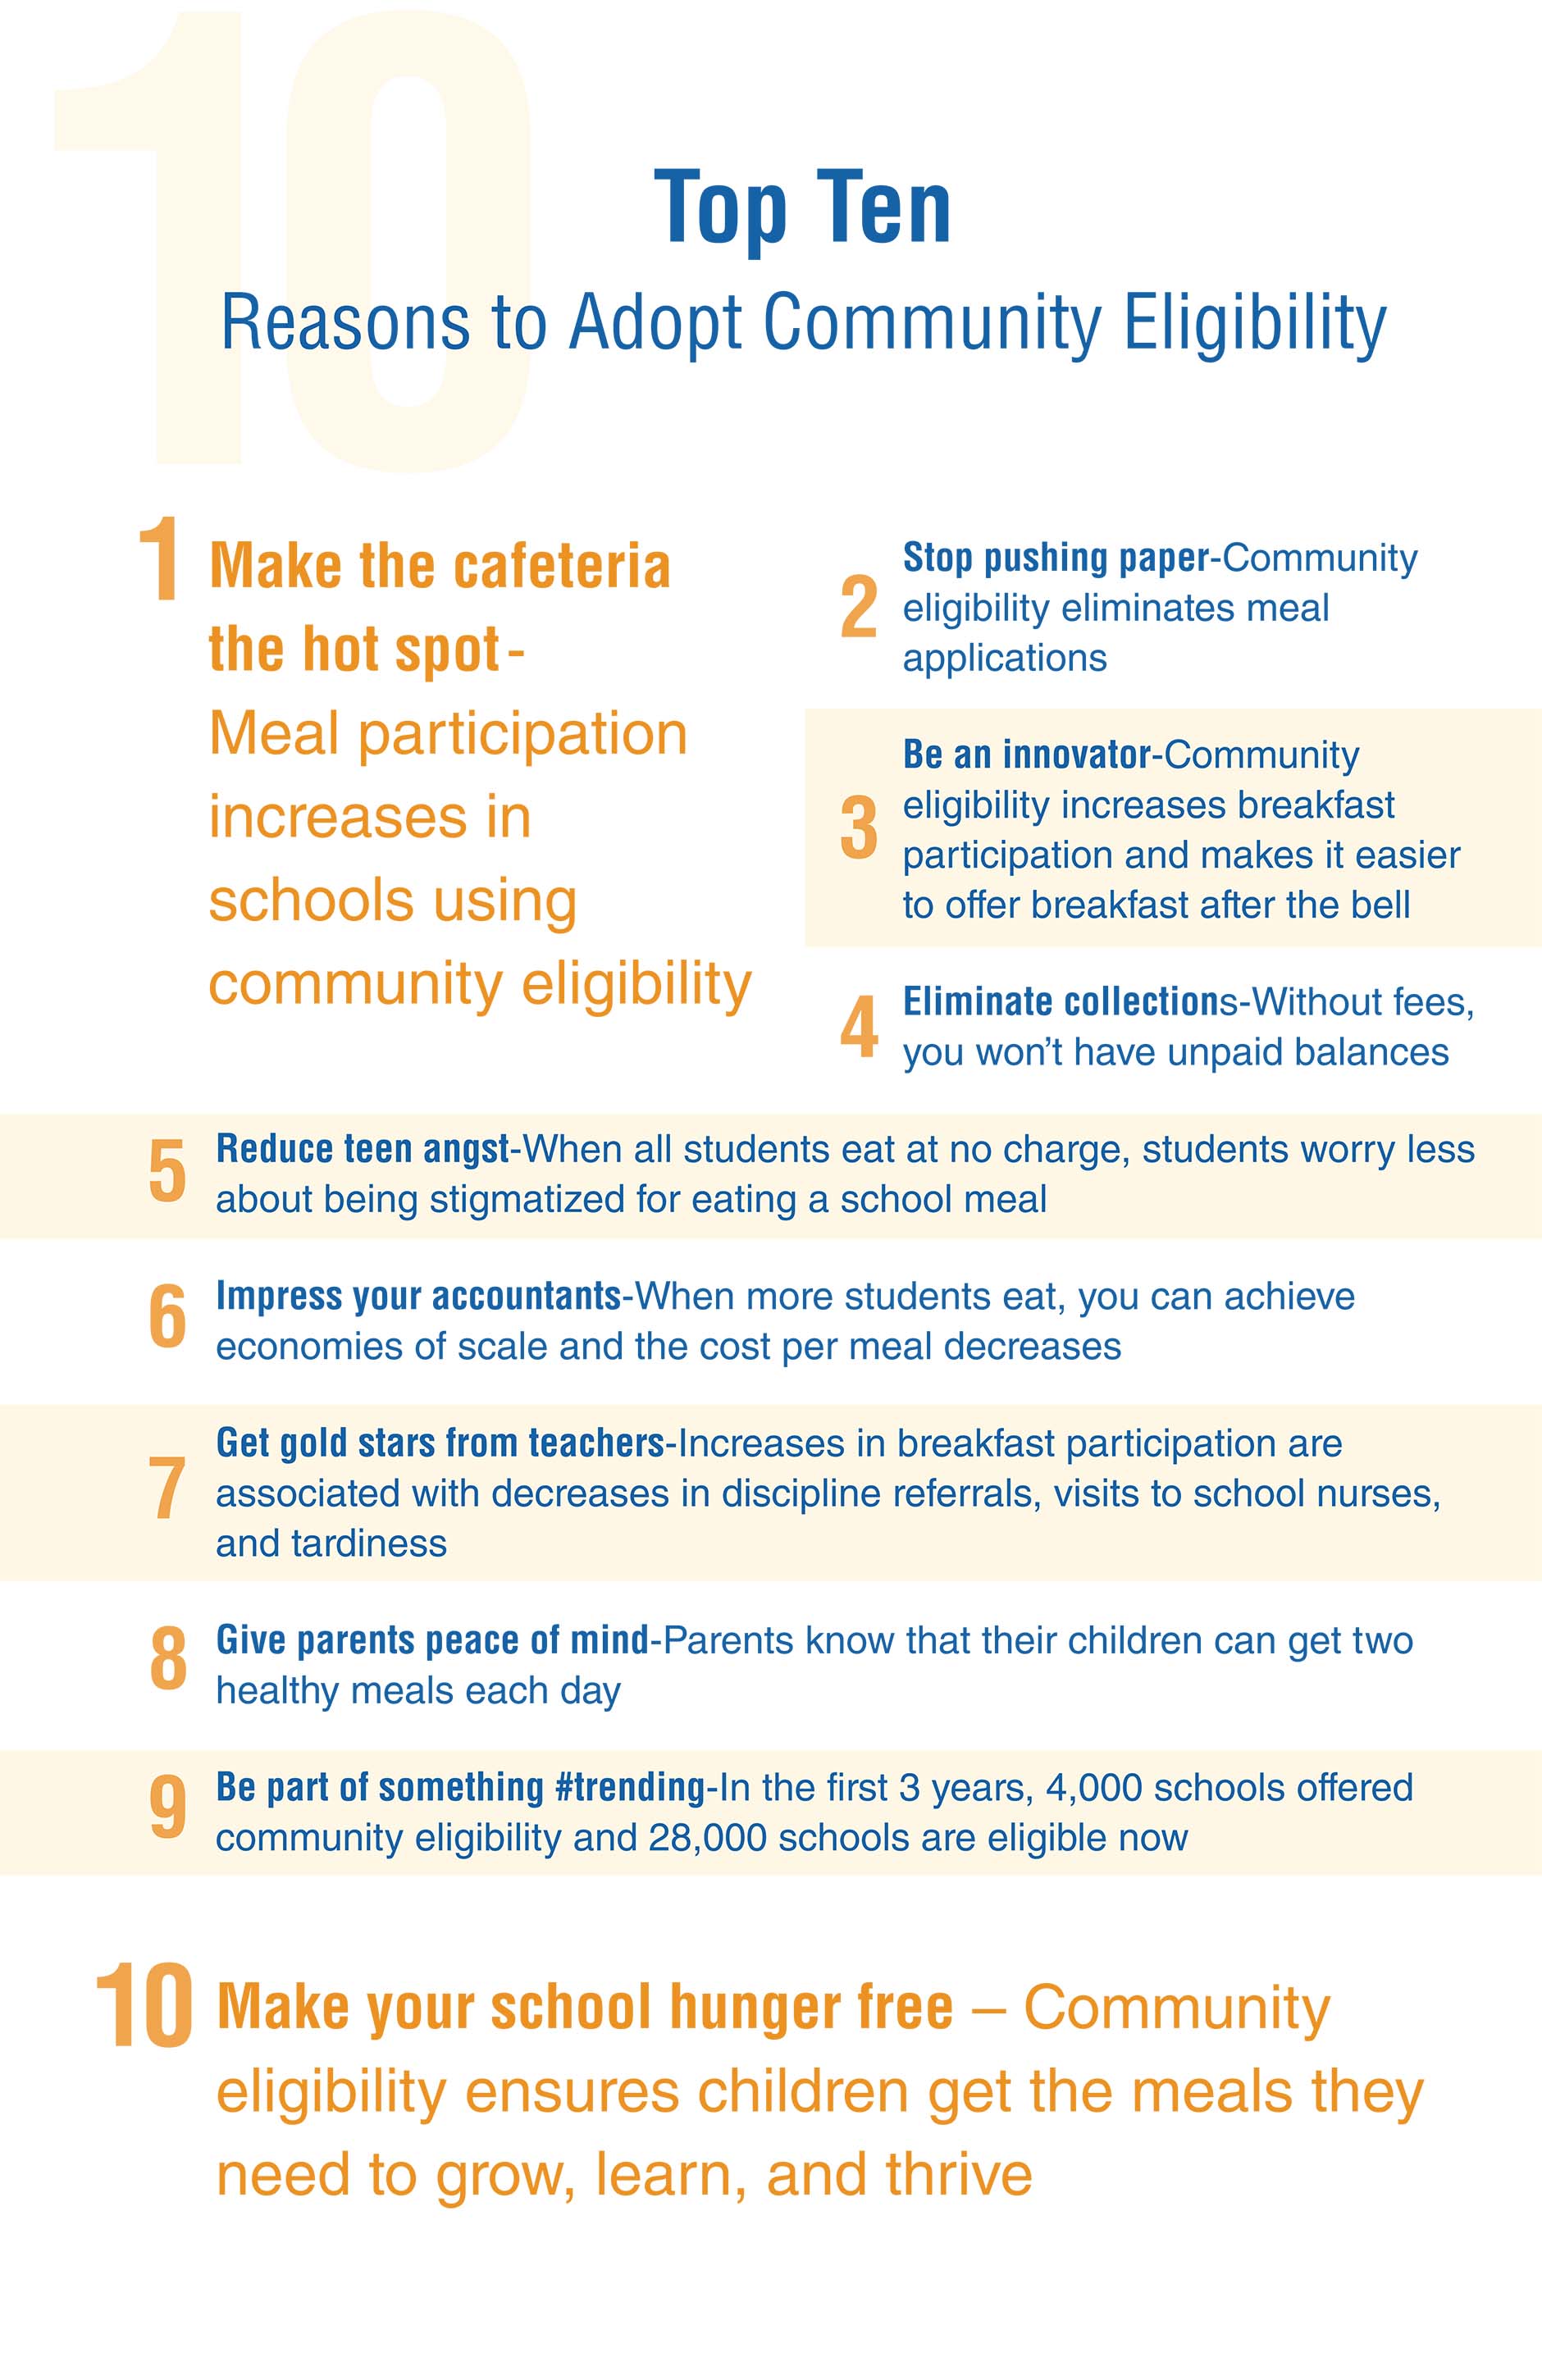 Top Ten Reasons for Schools to Adopt Community Eligibility